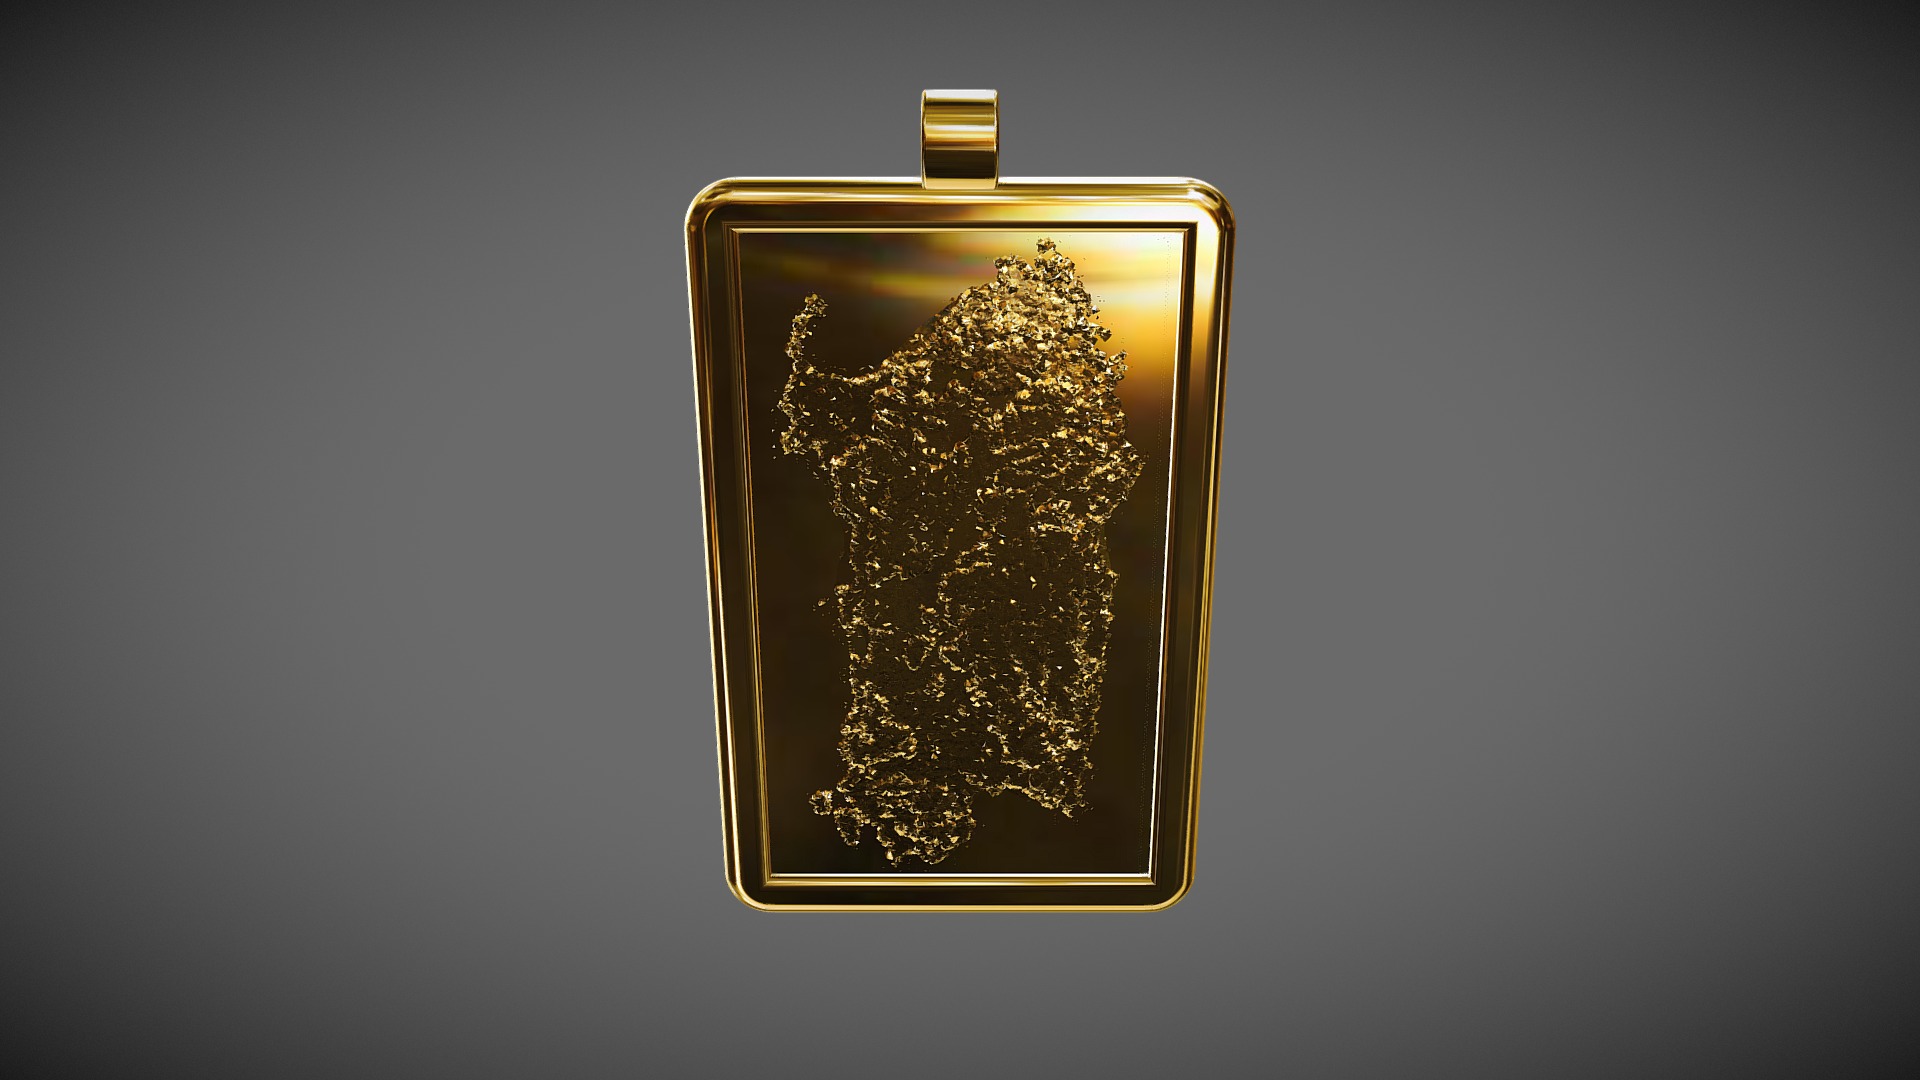 3D model Sardegna Mio Cuore - This is a 3D model of the Sardegna Mio Cuore. The 3D model is about a gold and green square with a gold ring on it.